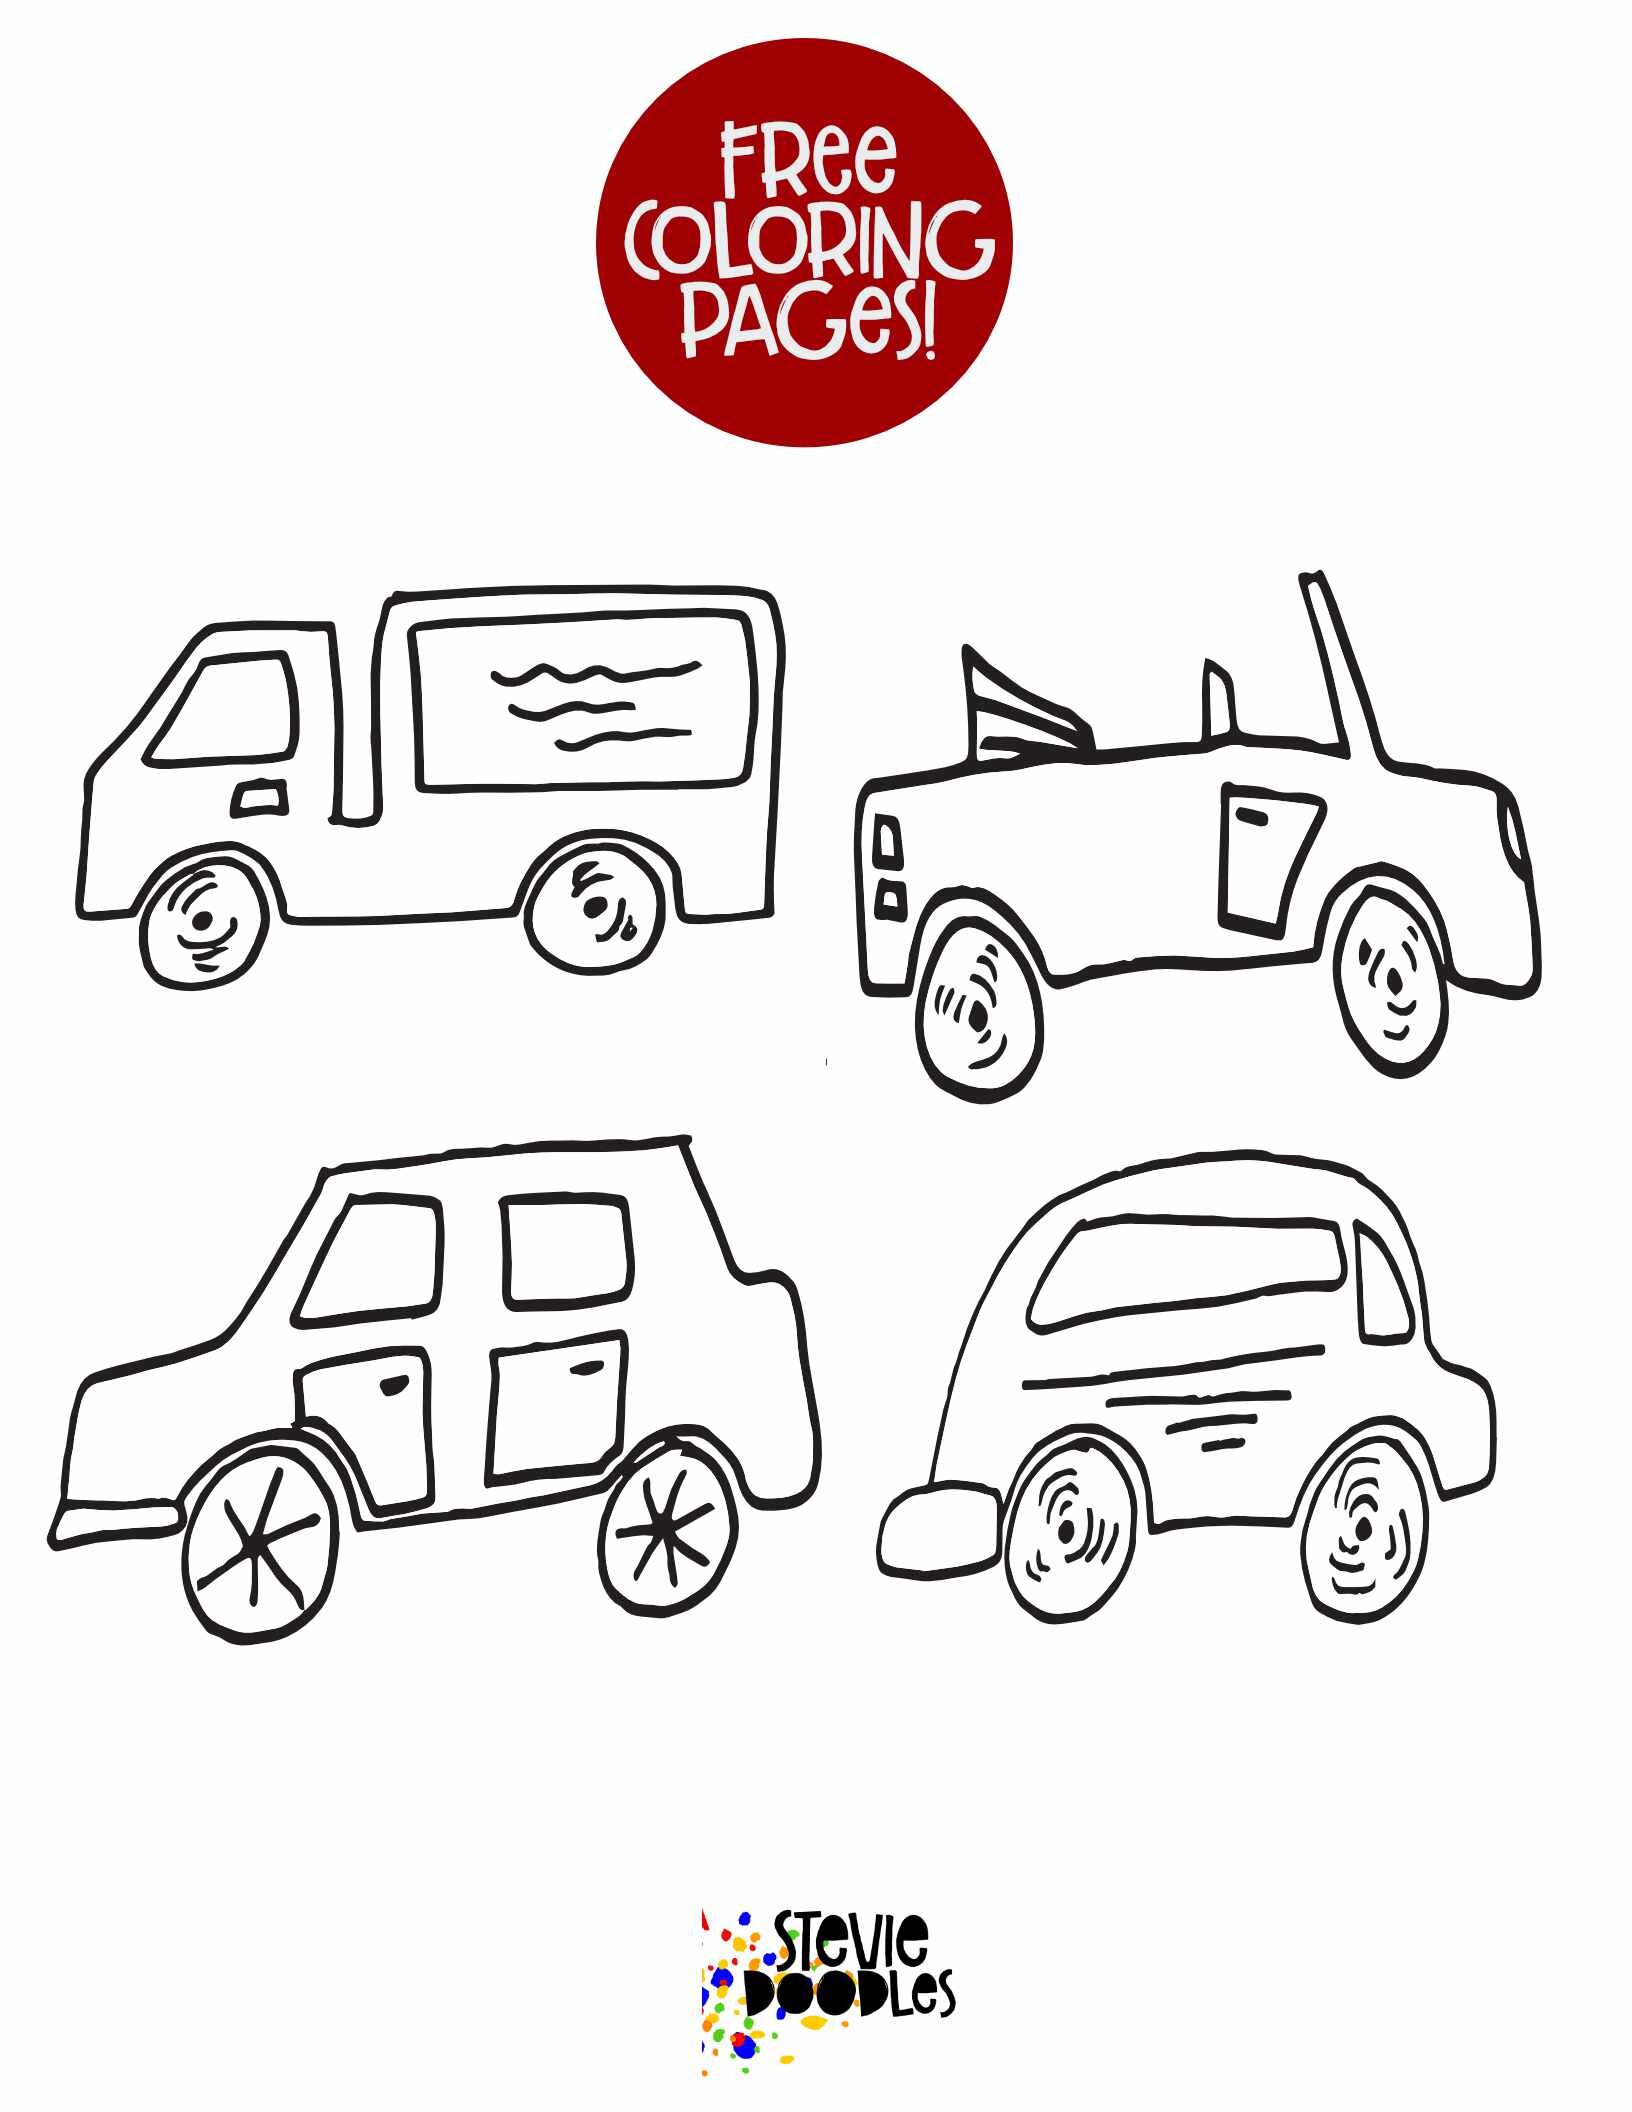 Free Printable Page! 4 Simple Little Cars!